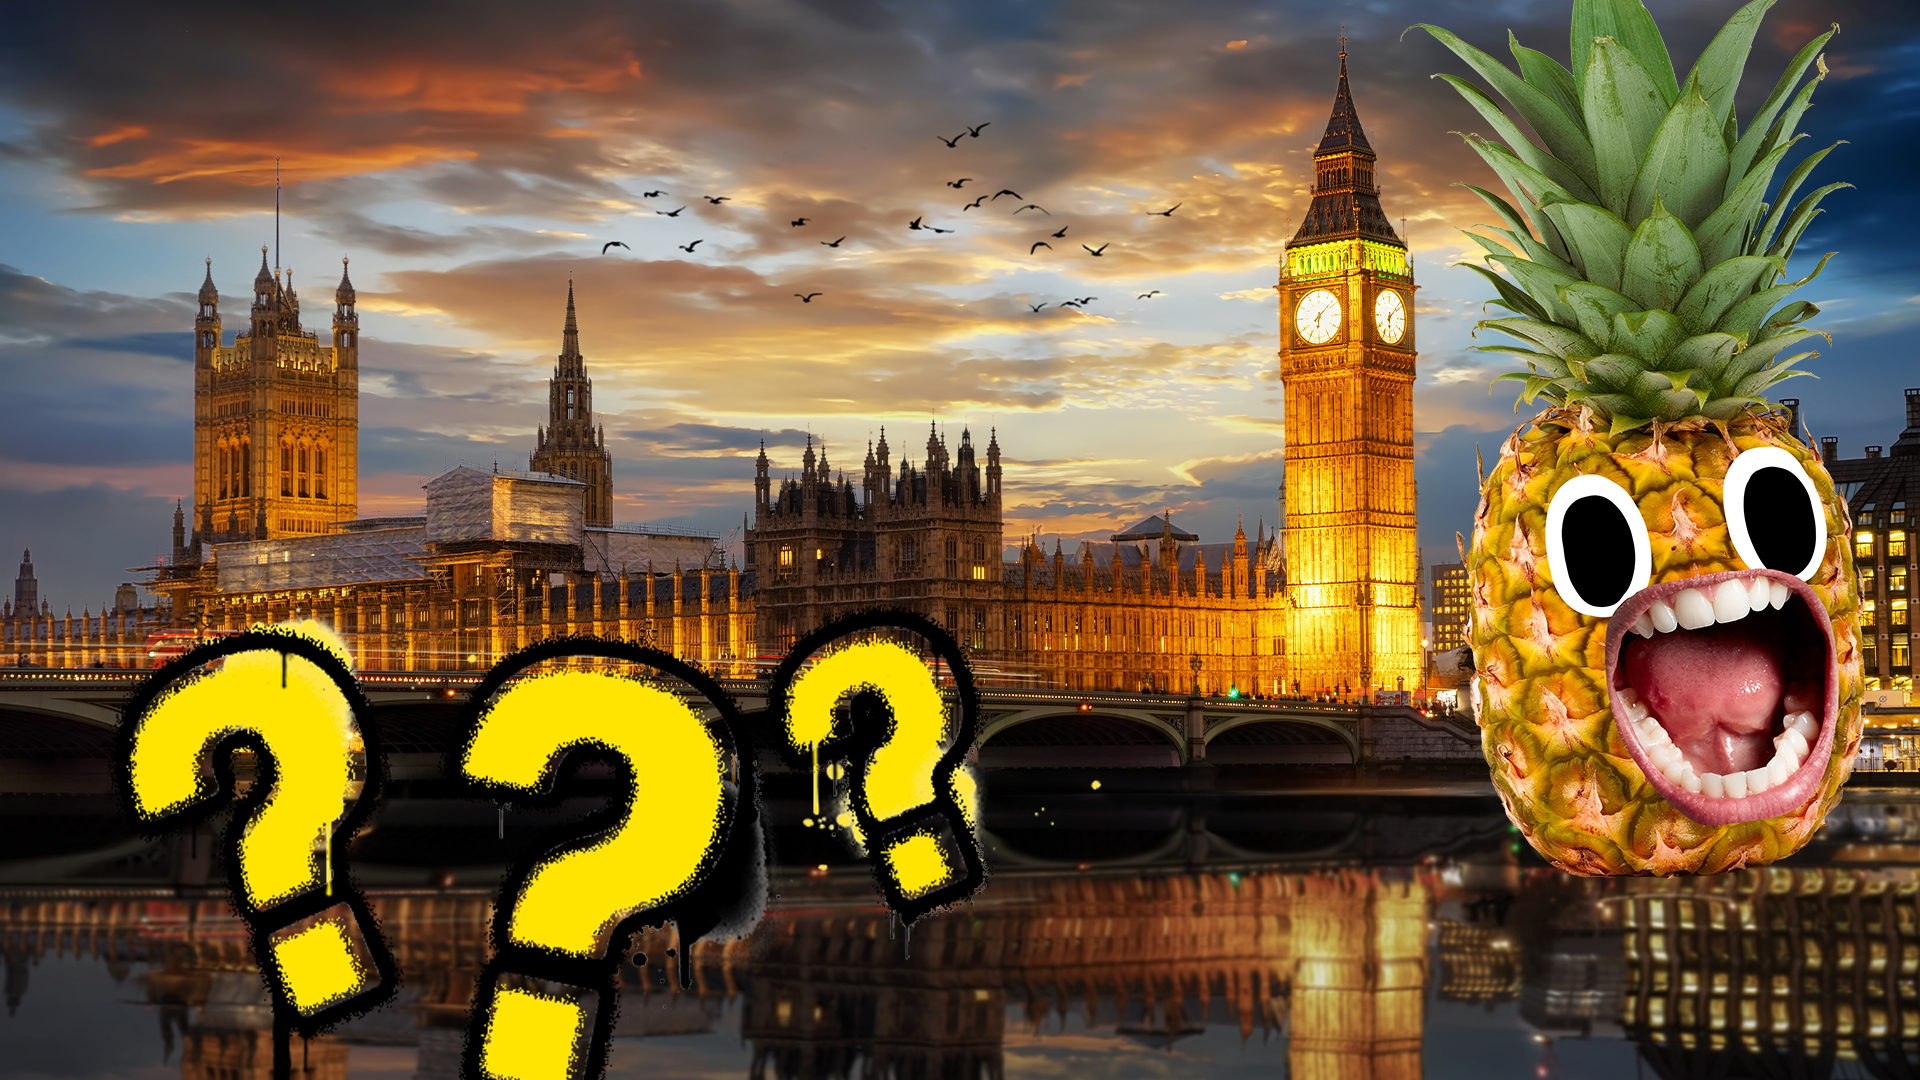 Houses of parliament and question marks with pineapple